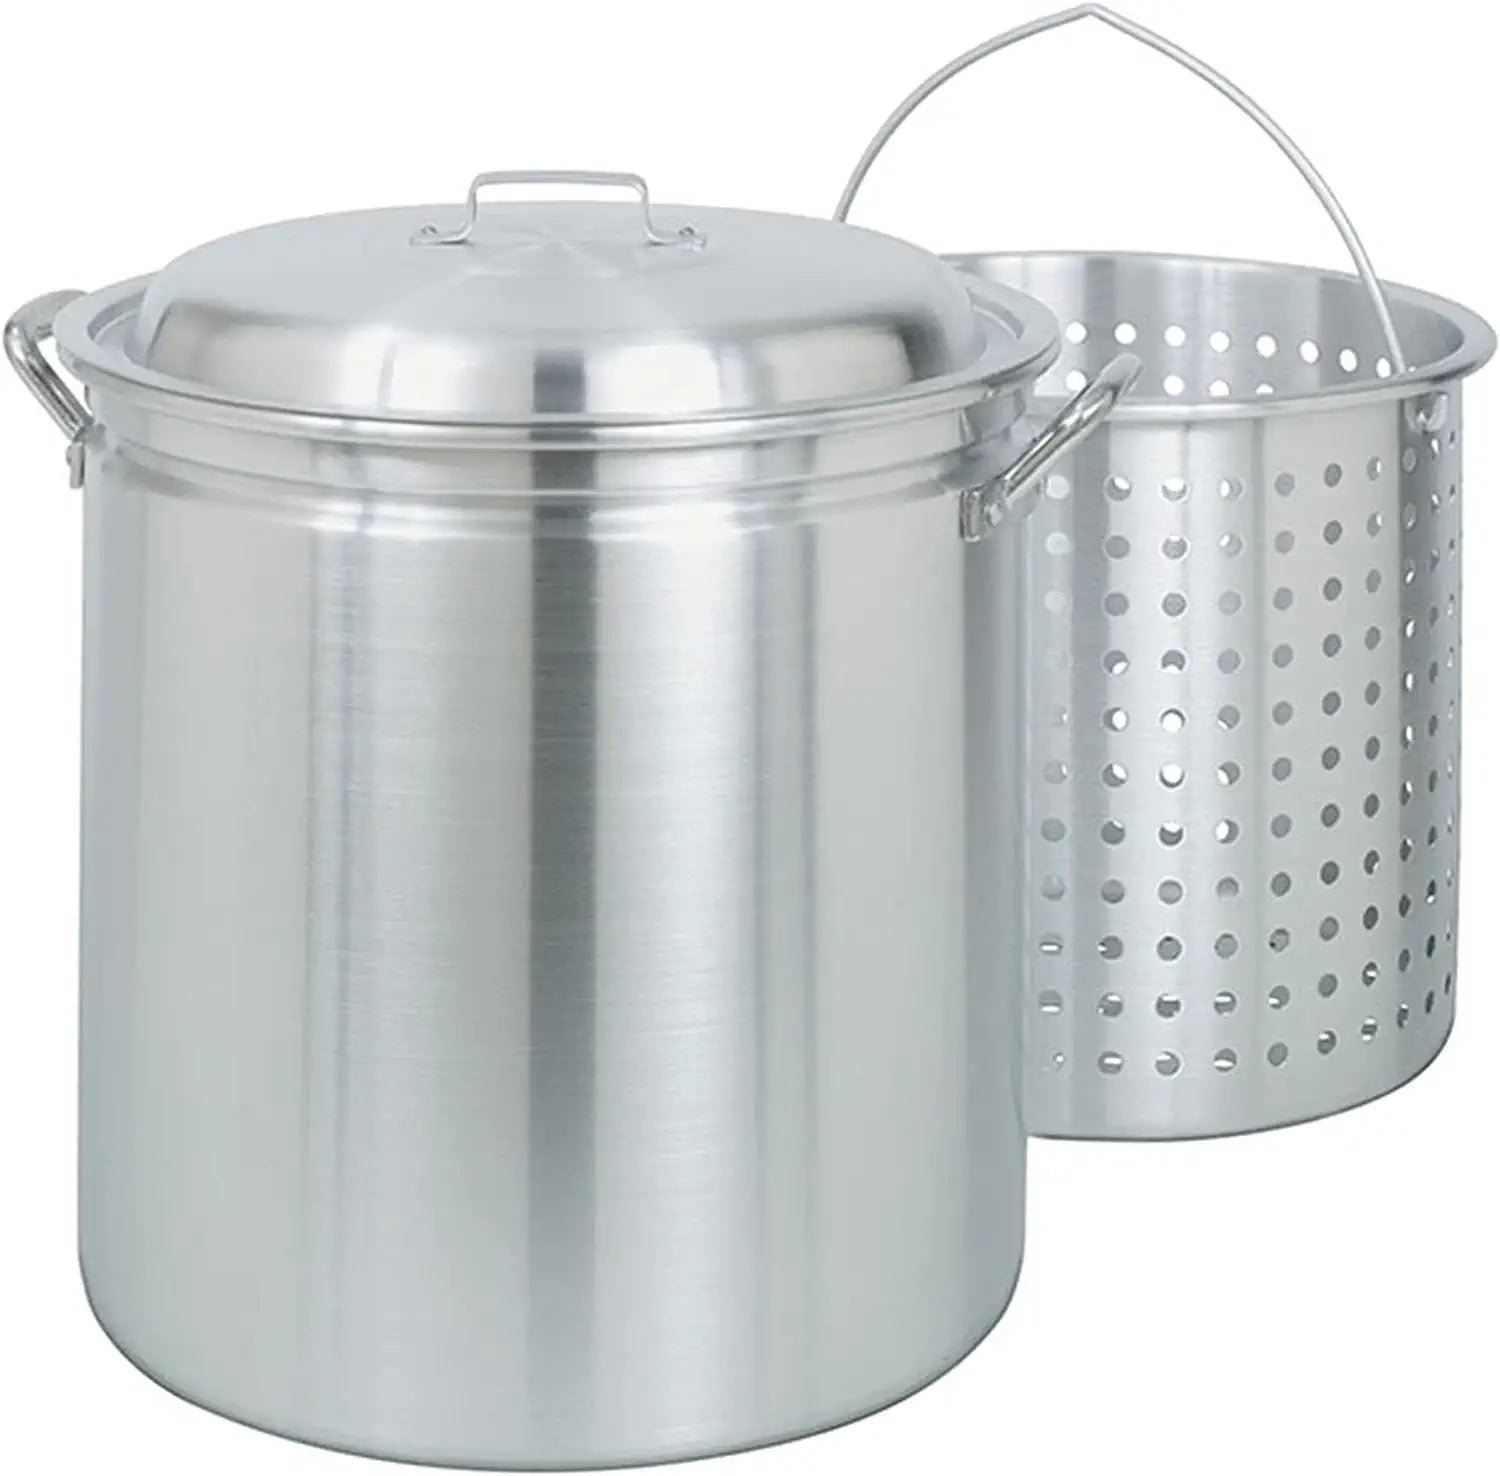 Bayou Classic 4060 60-qt Aluminum Stockpot w/ Basket Features Domed Vented Lid Heavy Riveted Handles Perforated Aluminum Basket Perfect For Boiling Steaming and Canning